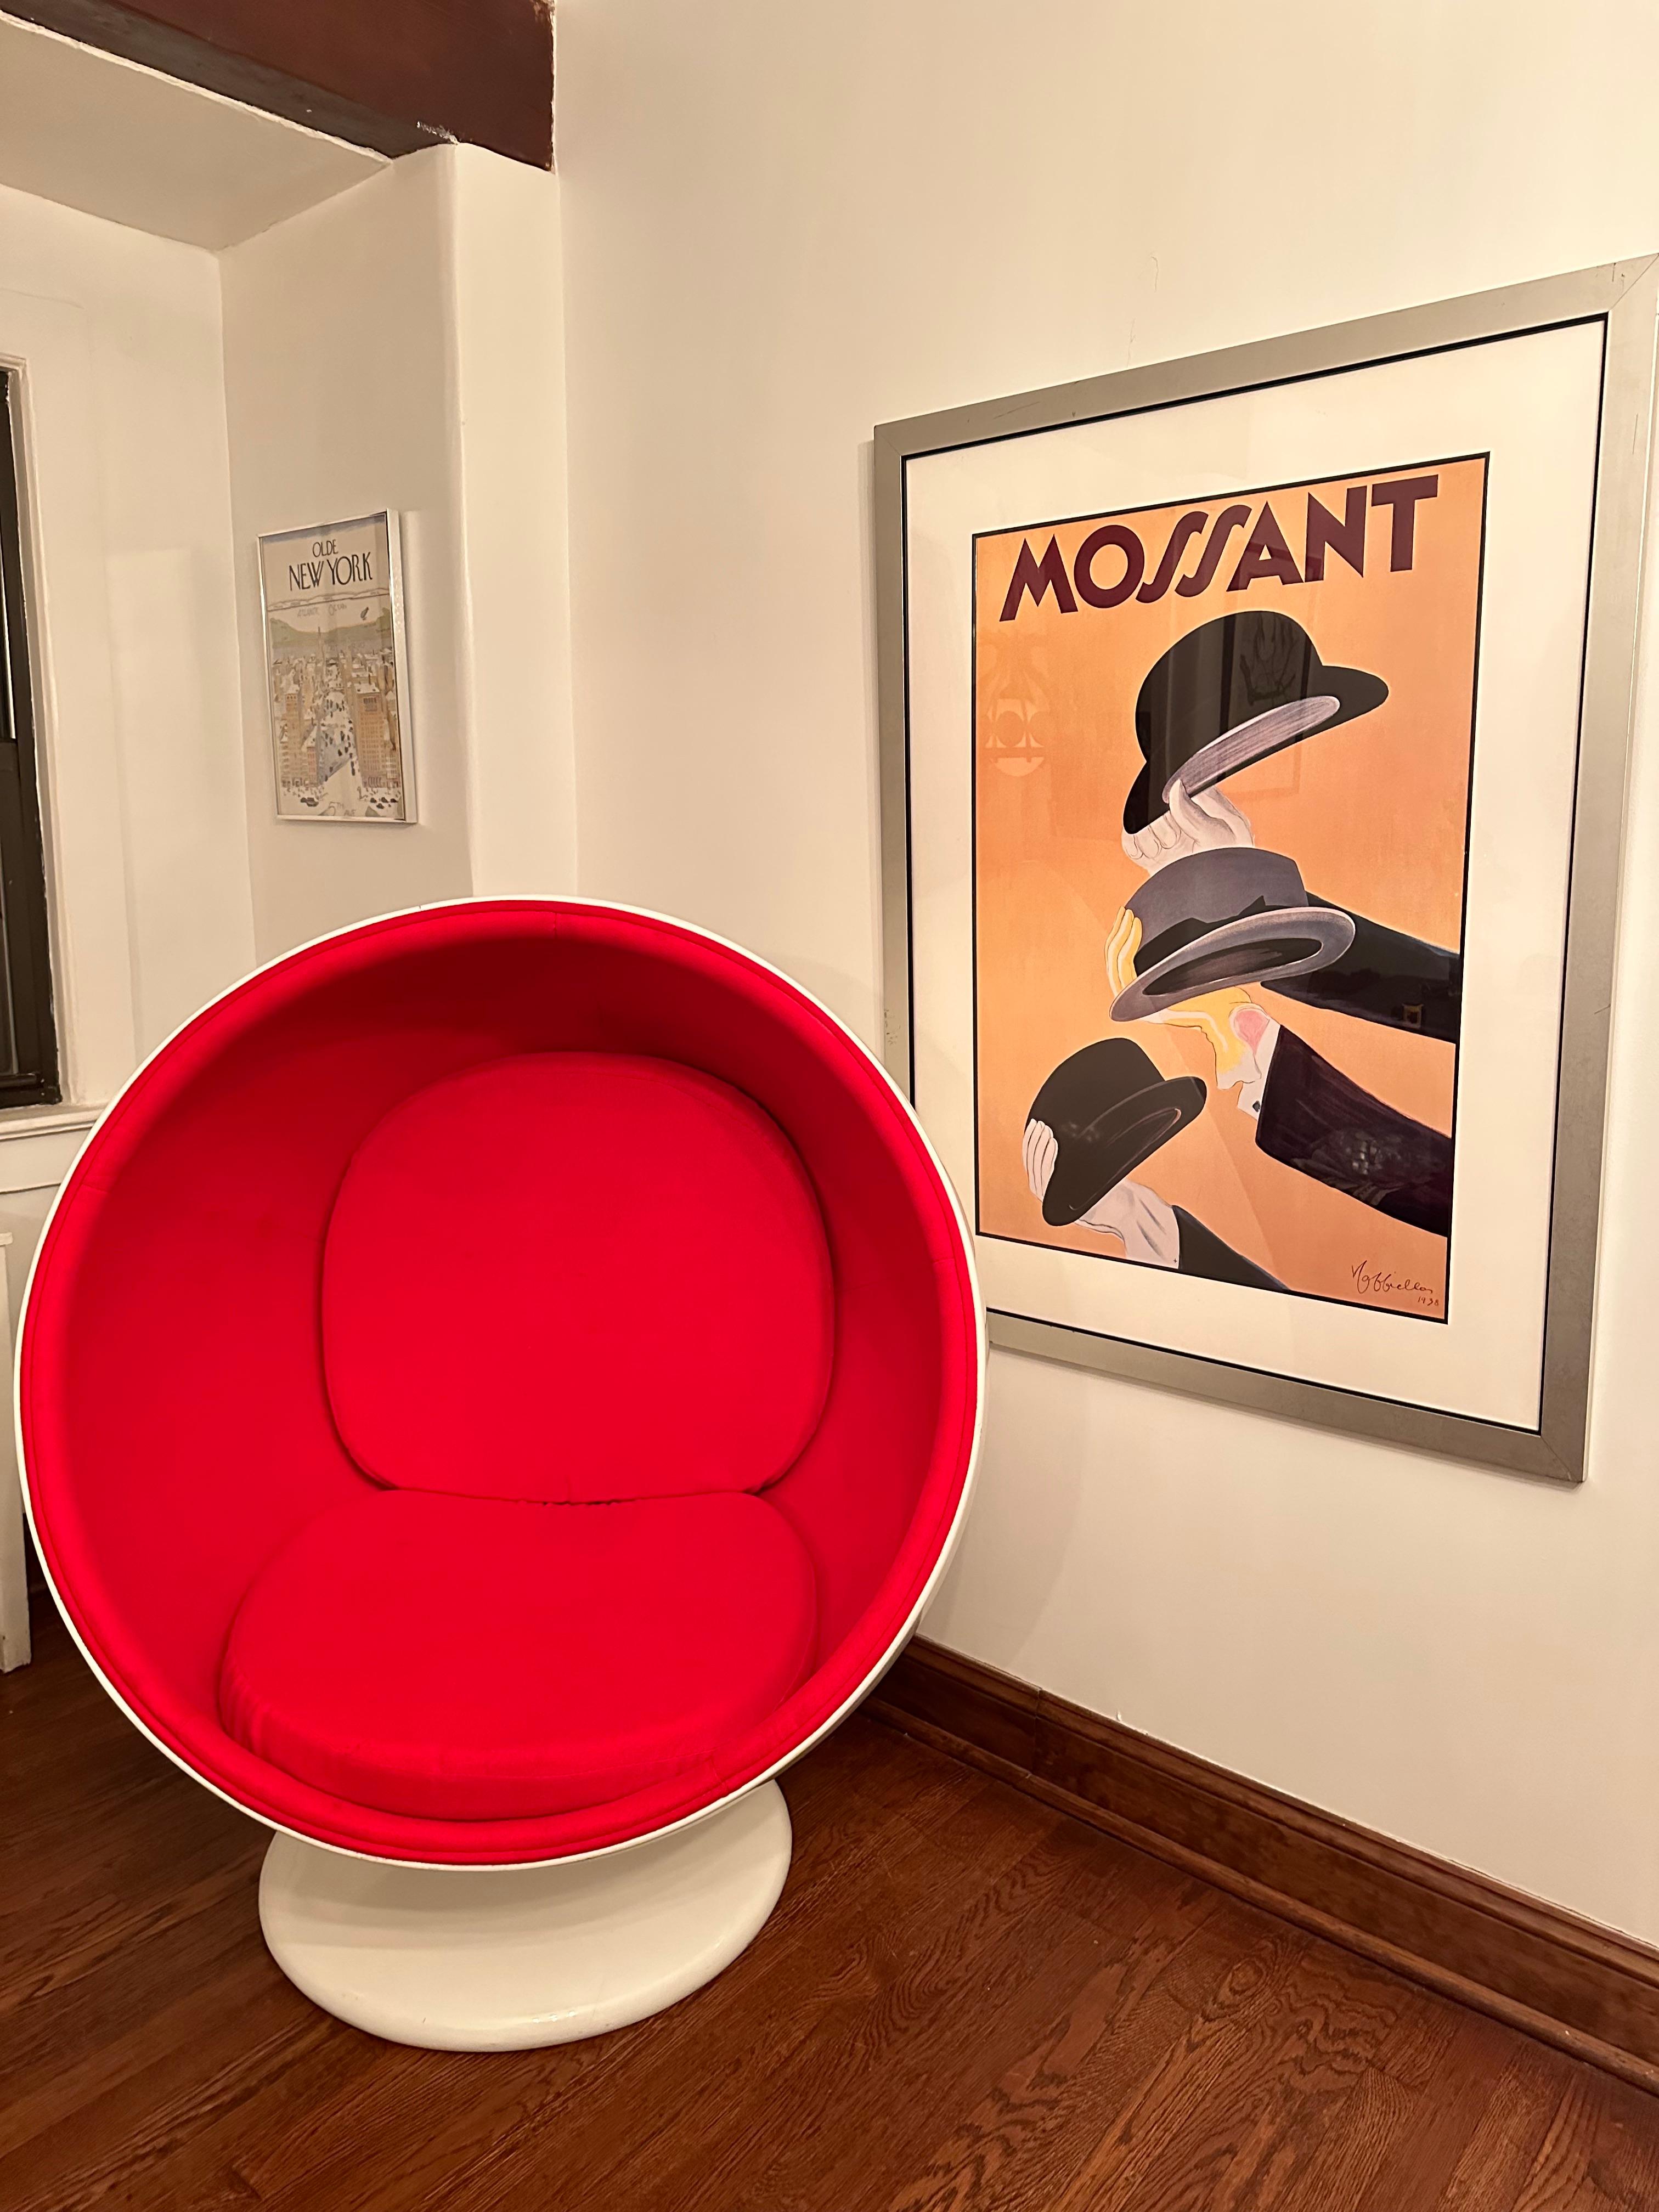 Mossant 3 hats is a stunning piece of art that captures the essence of classic style and sophistication. The poster features three elegantly crafted hats, each with its unique design and color, carefully placed in a triangular formation against a